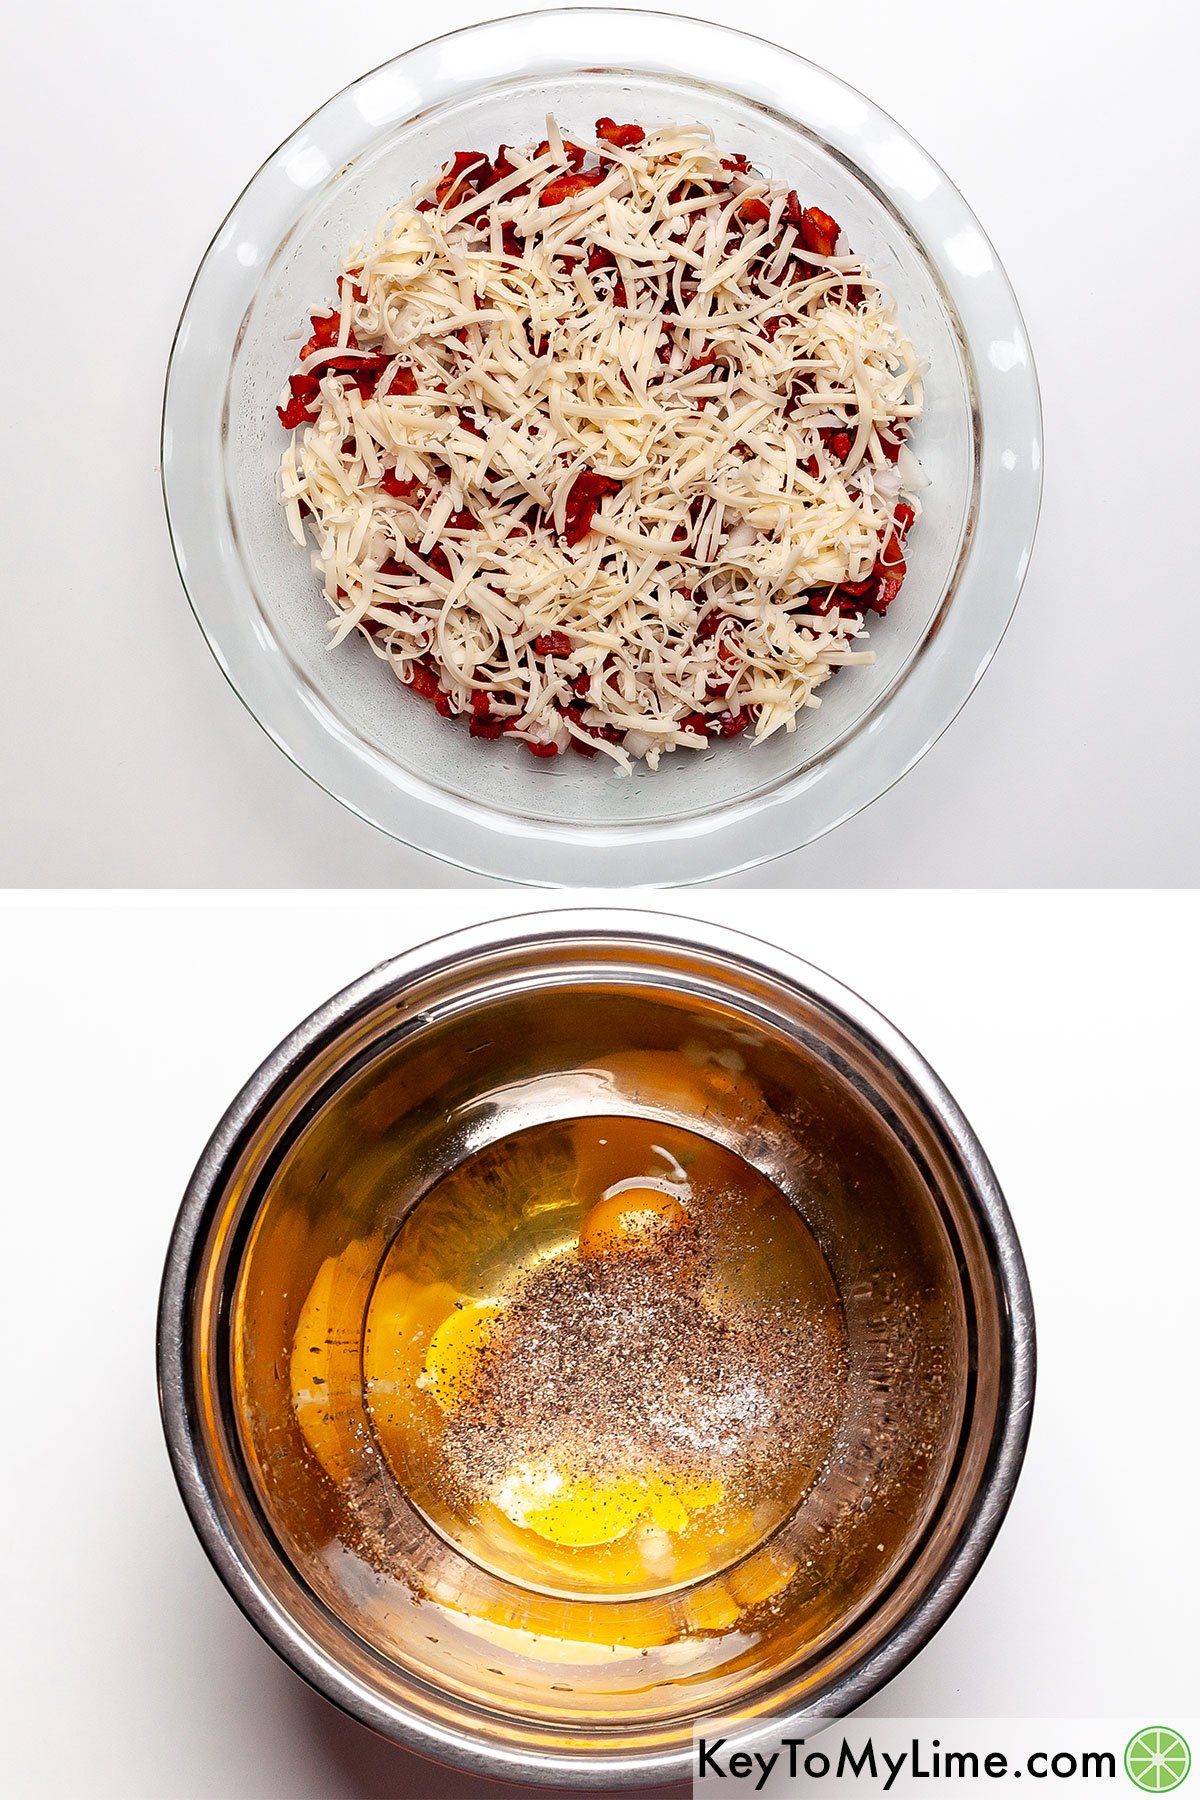 A process collage showing layering bacon and cheese in a pie dish, then mixing eggs with seasonings.